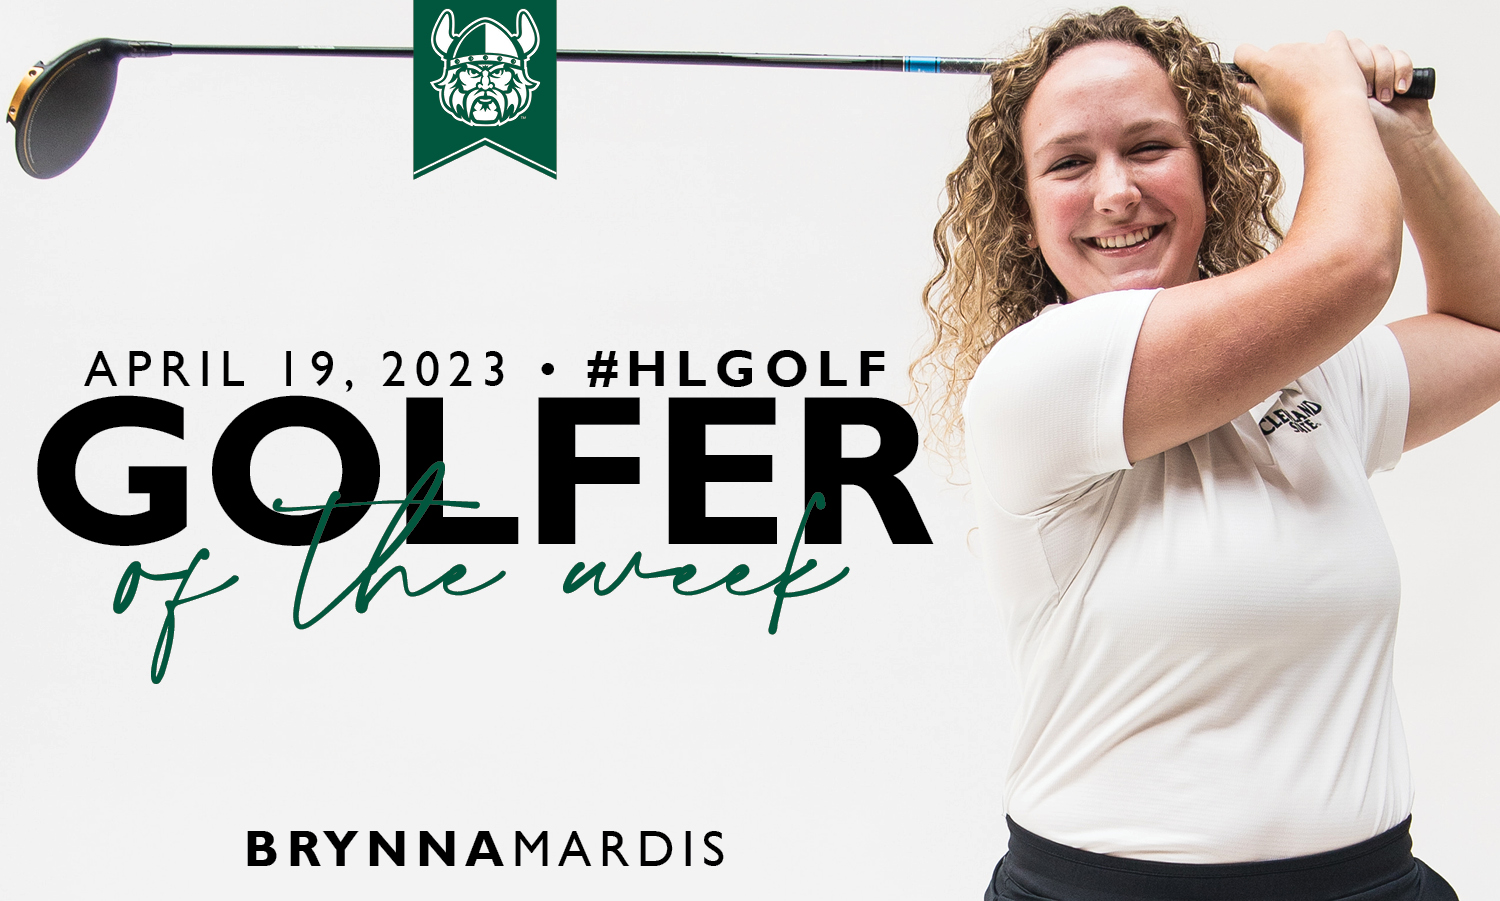 Mardis Named #HLGolf Women’s Player of the Week